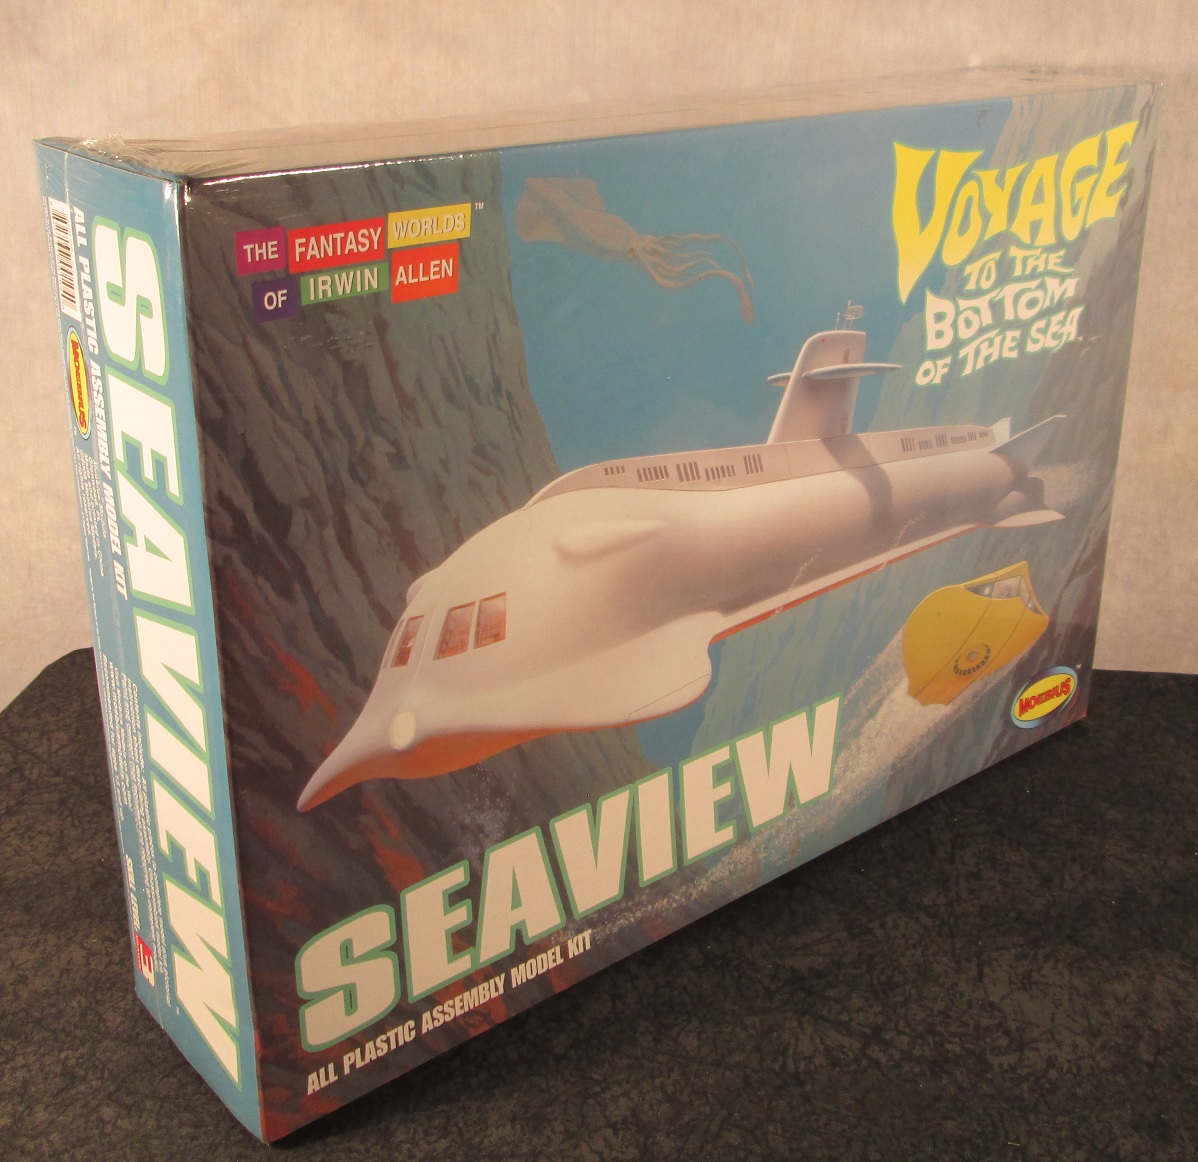 MMK707 for sale online Moebius Models 1:128 Voyage to the Bottom of the Seaview Submarine 